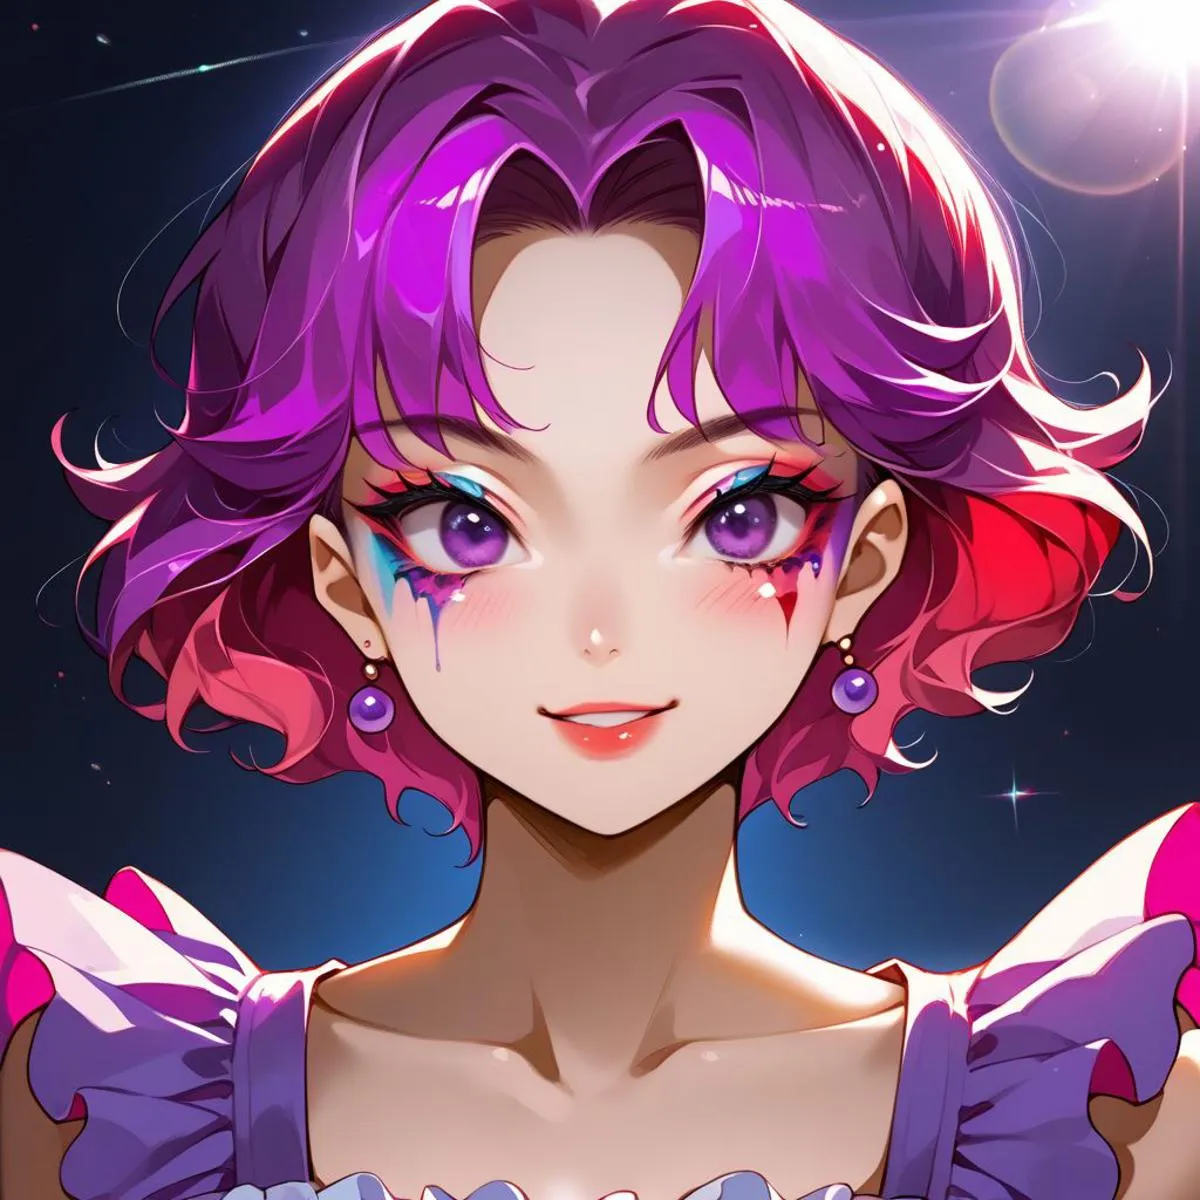 A digitally created anime girl with vibrant purple hair and colorful makeup using Stable Diffusion AI tool.